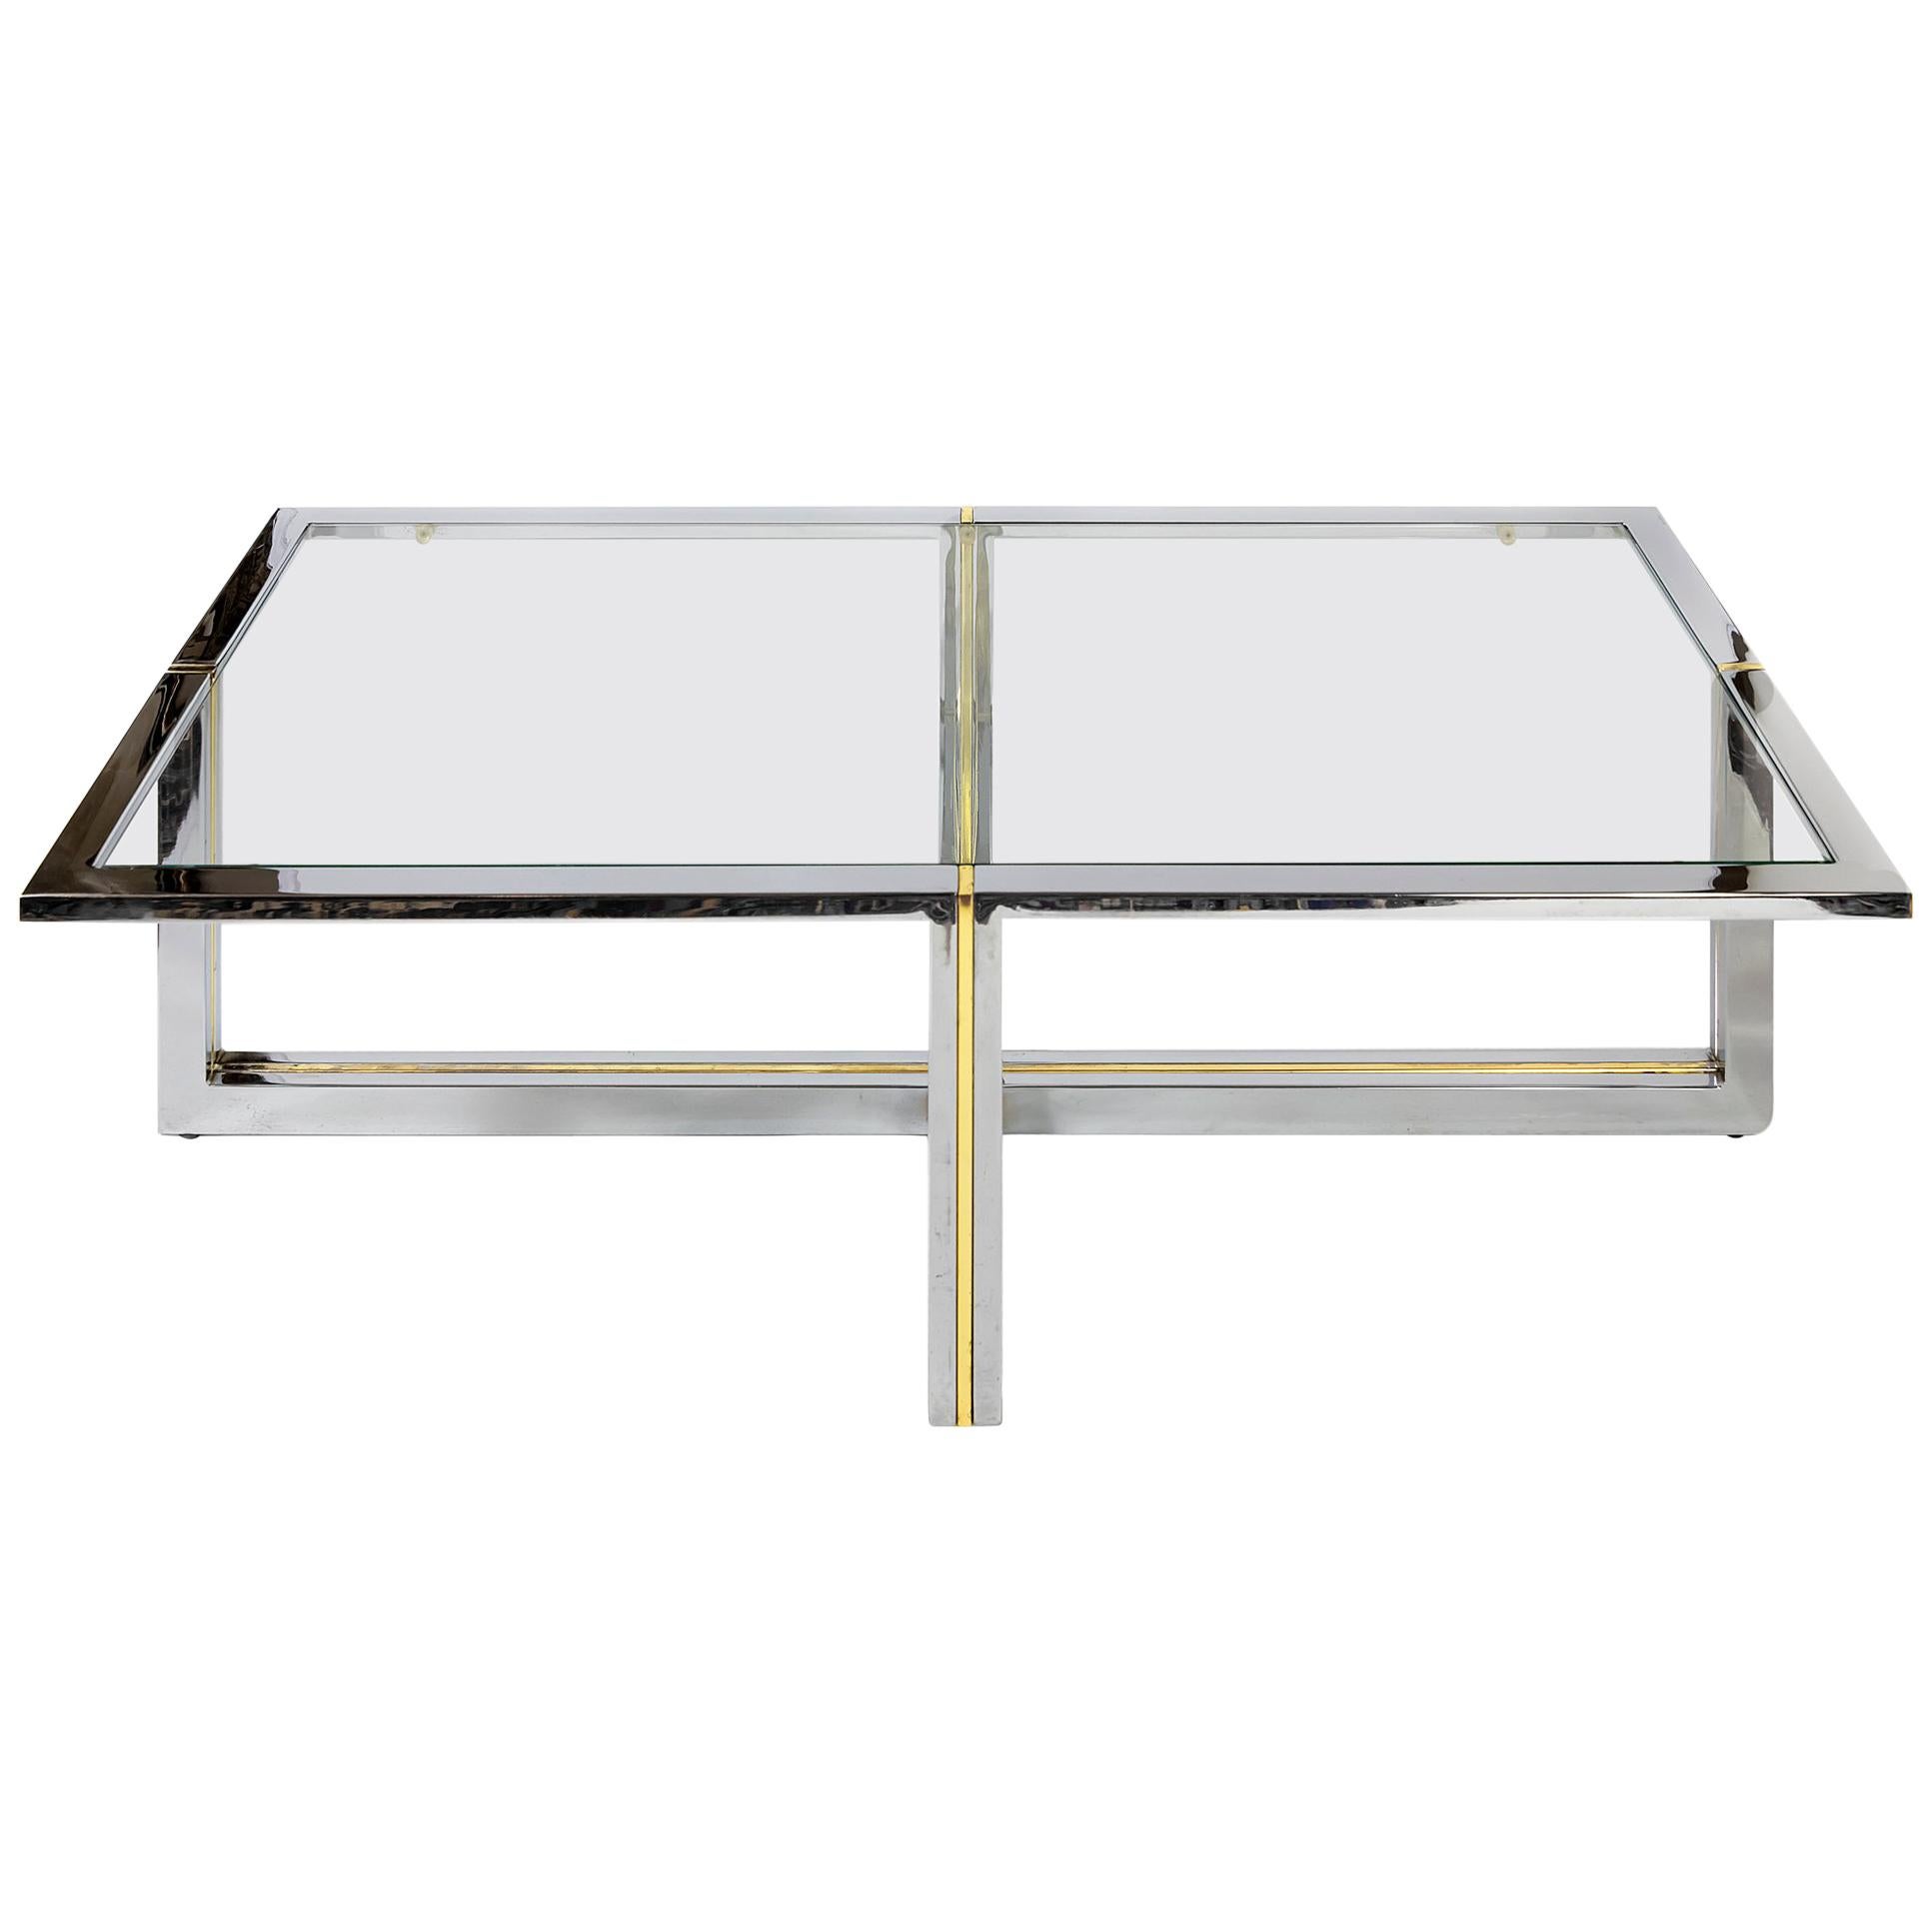 Italian Midcentury Chrome, Brass and Glass Coffee Table, Willy Rizzo, circa 1970